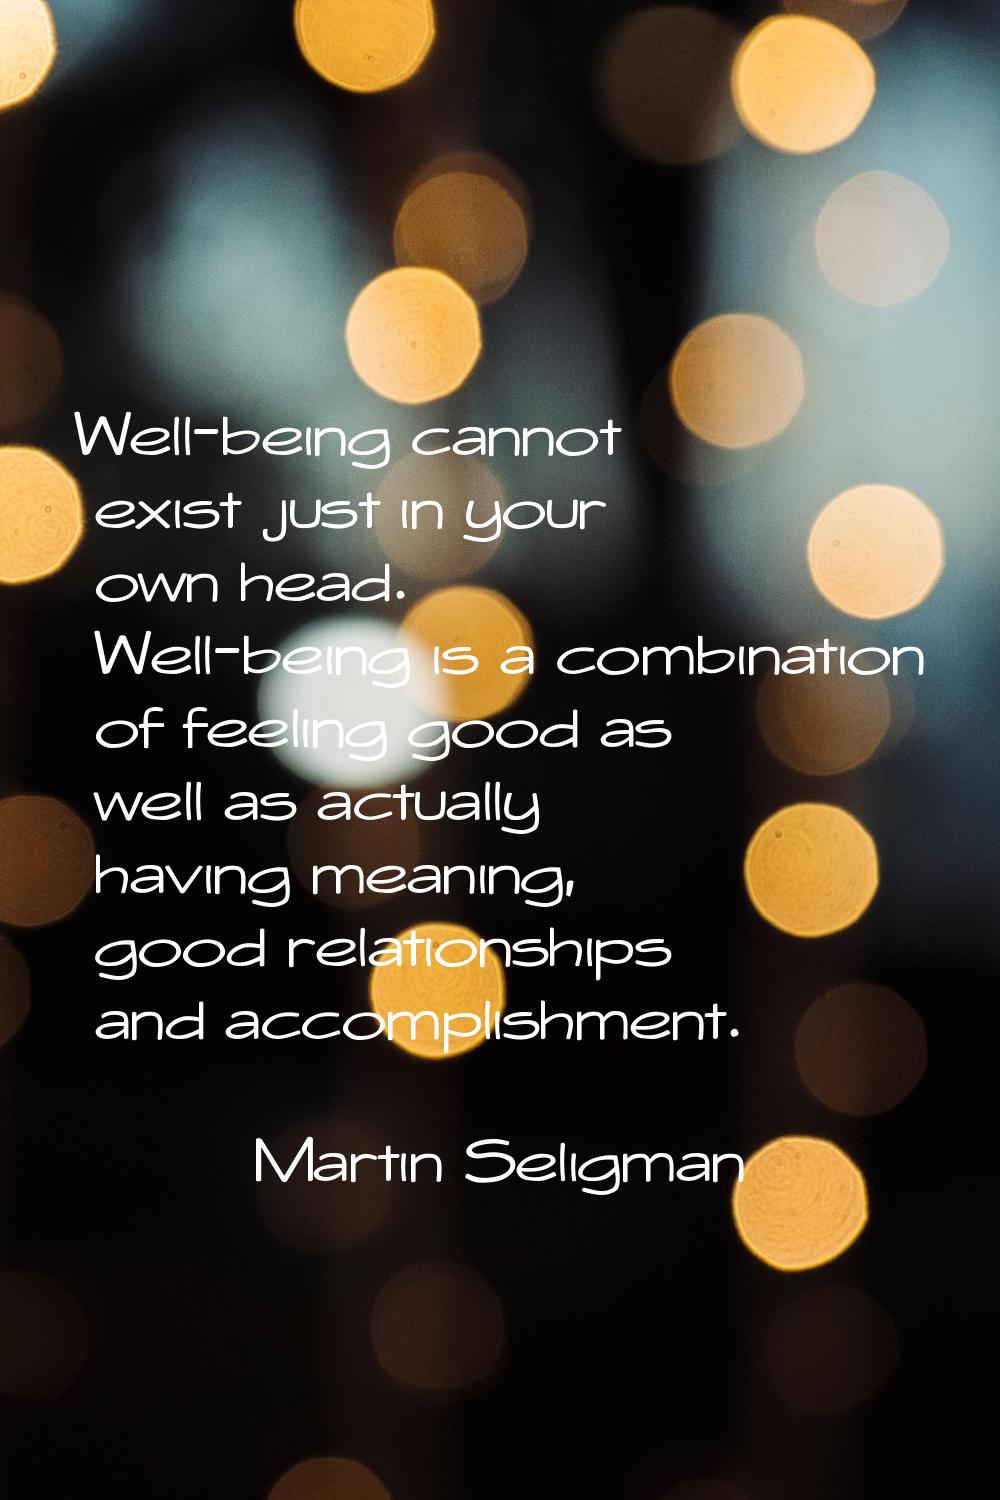 Well-being cannot exist just in your own head. Well-being is a combination of feeling good as well 